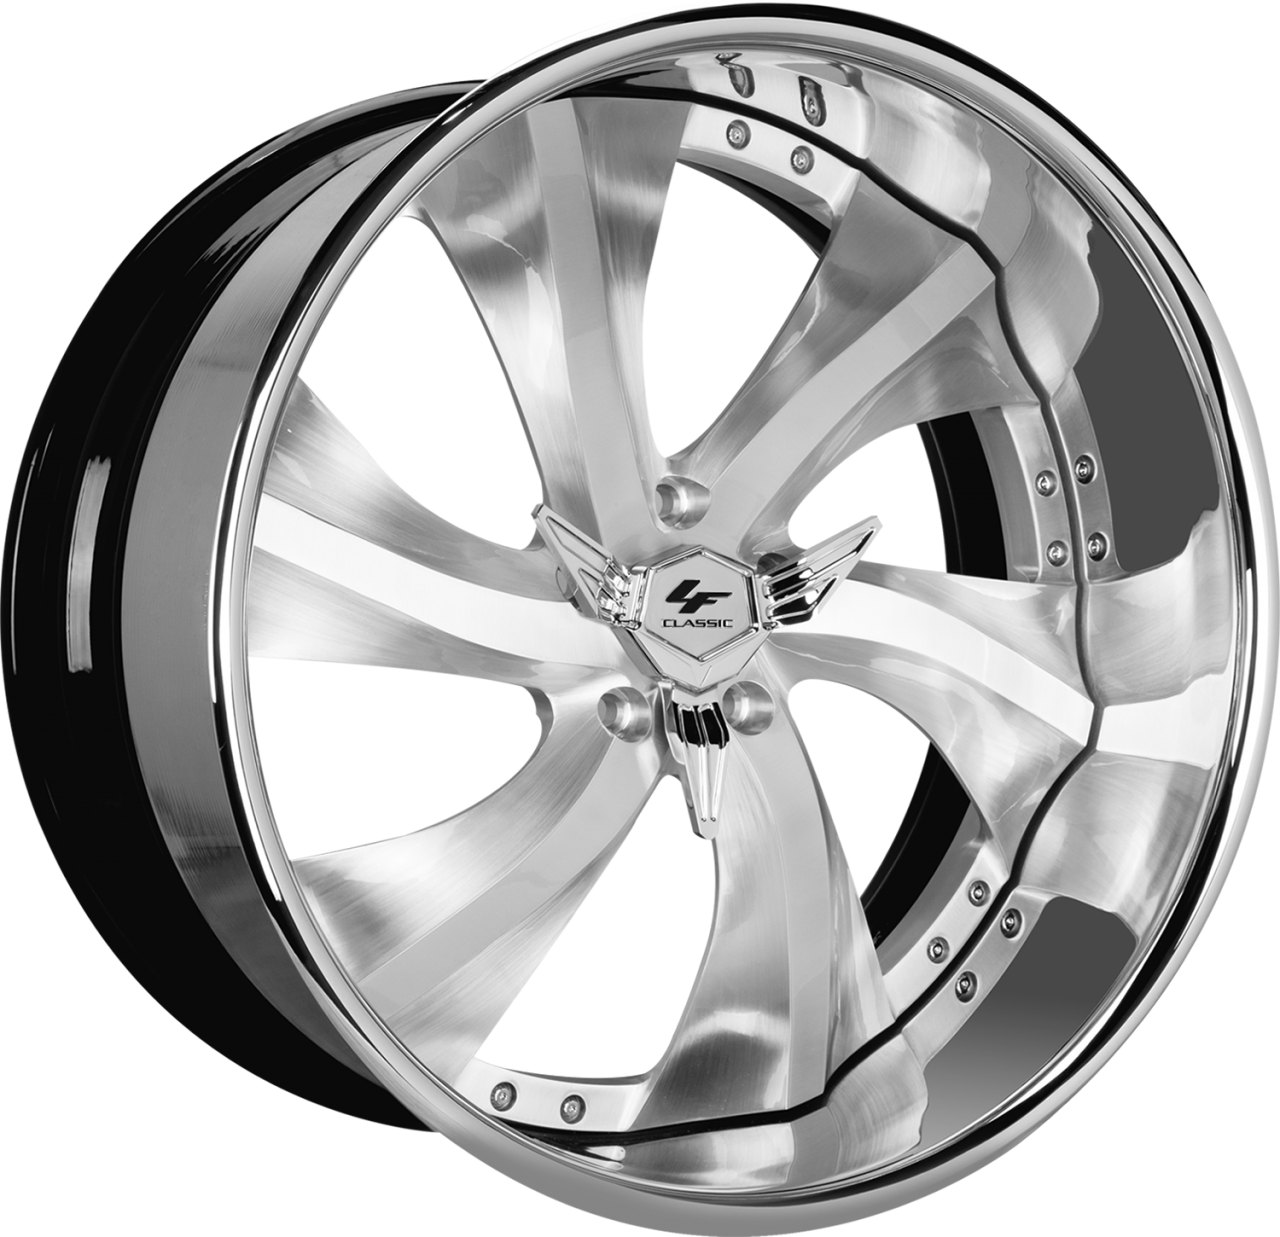 Artis Forged Boss wheel with Brushed finish